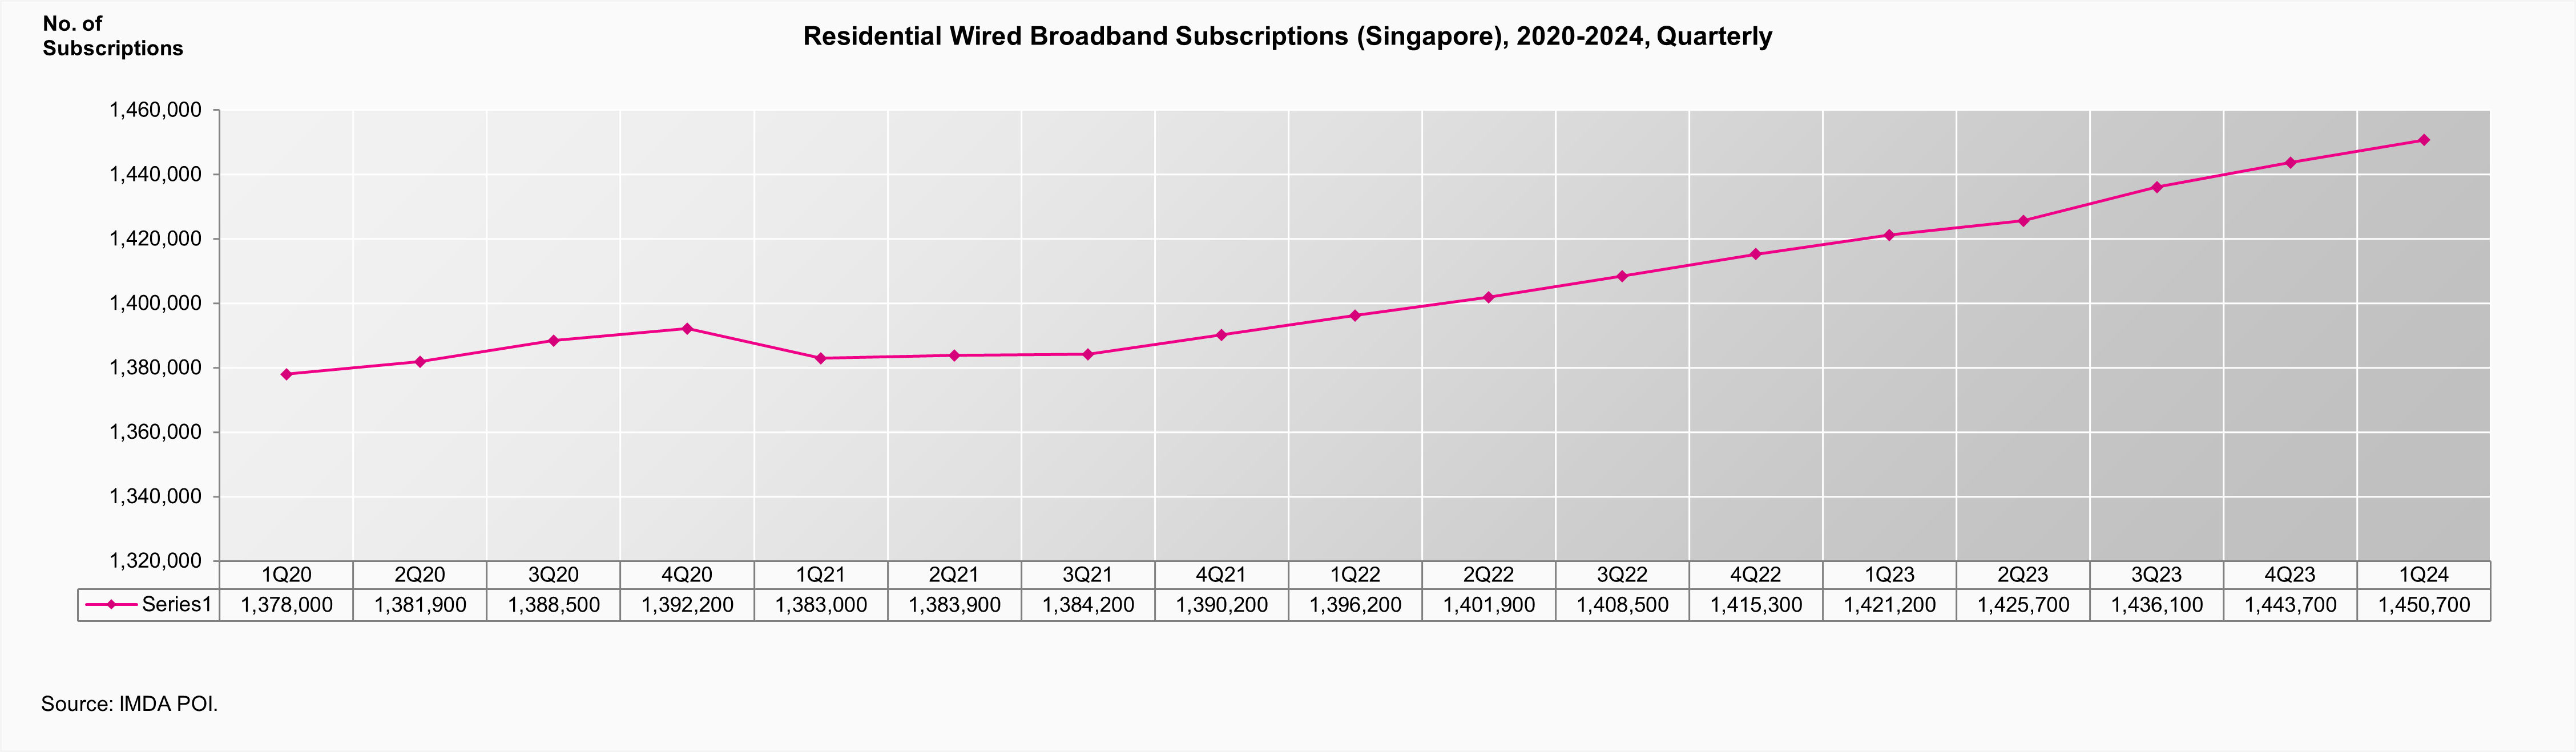 Residential Wired Broadband Subscriptions 1Q24